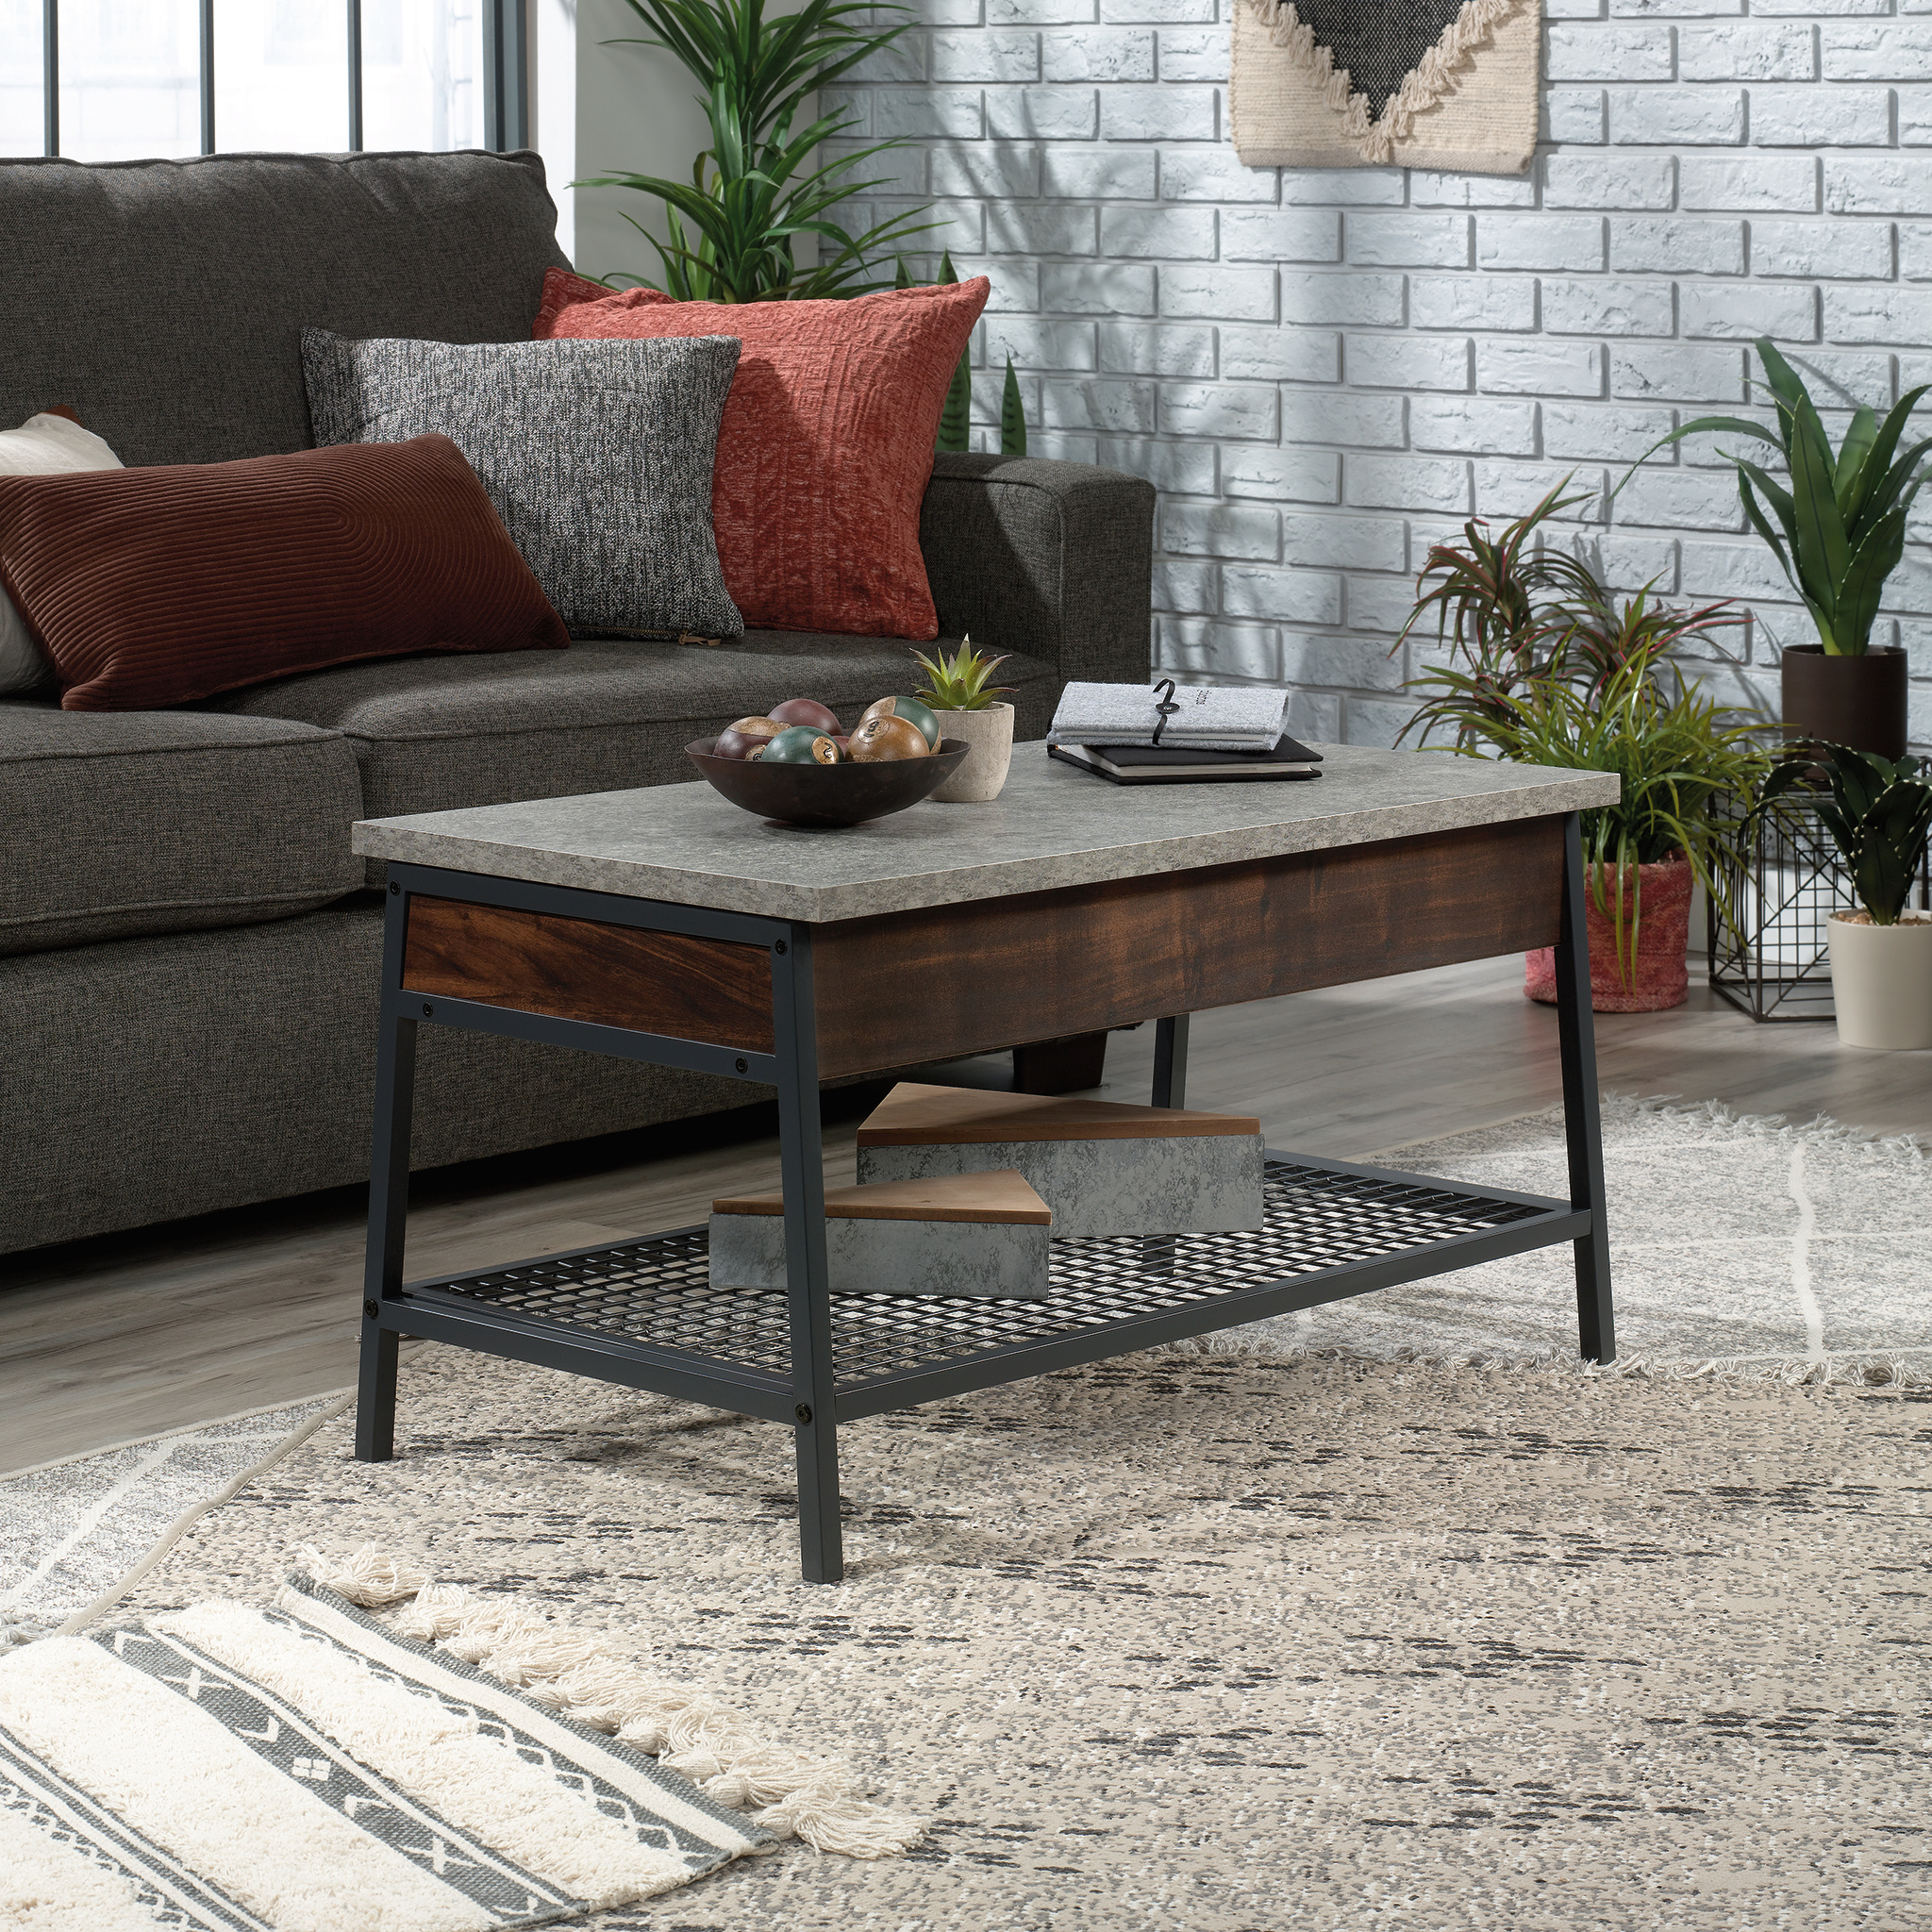 Sauder Market Commons Metal Coffee Table, Rich Walnut Finish - image 1 of 11